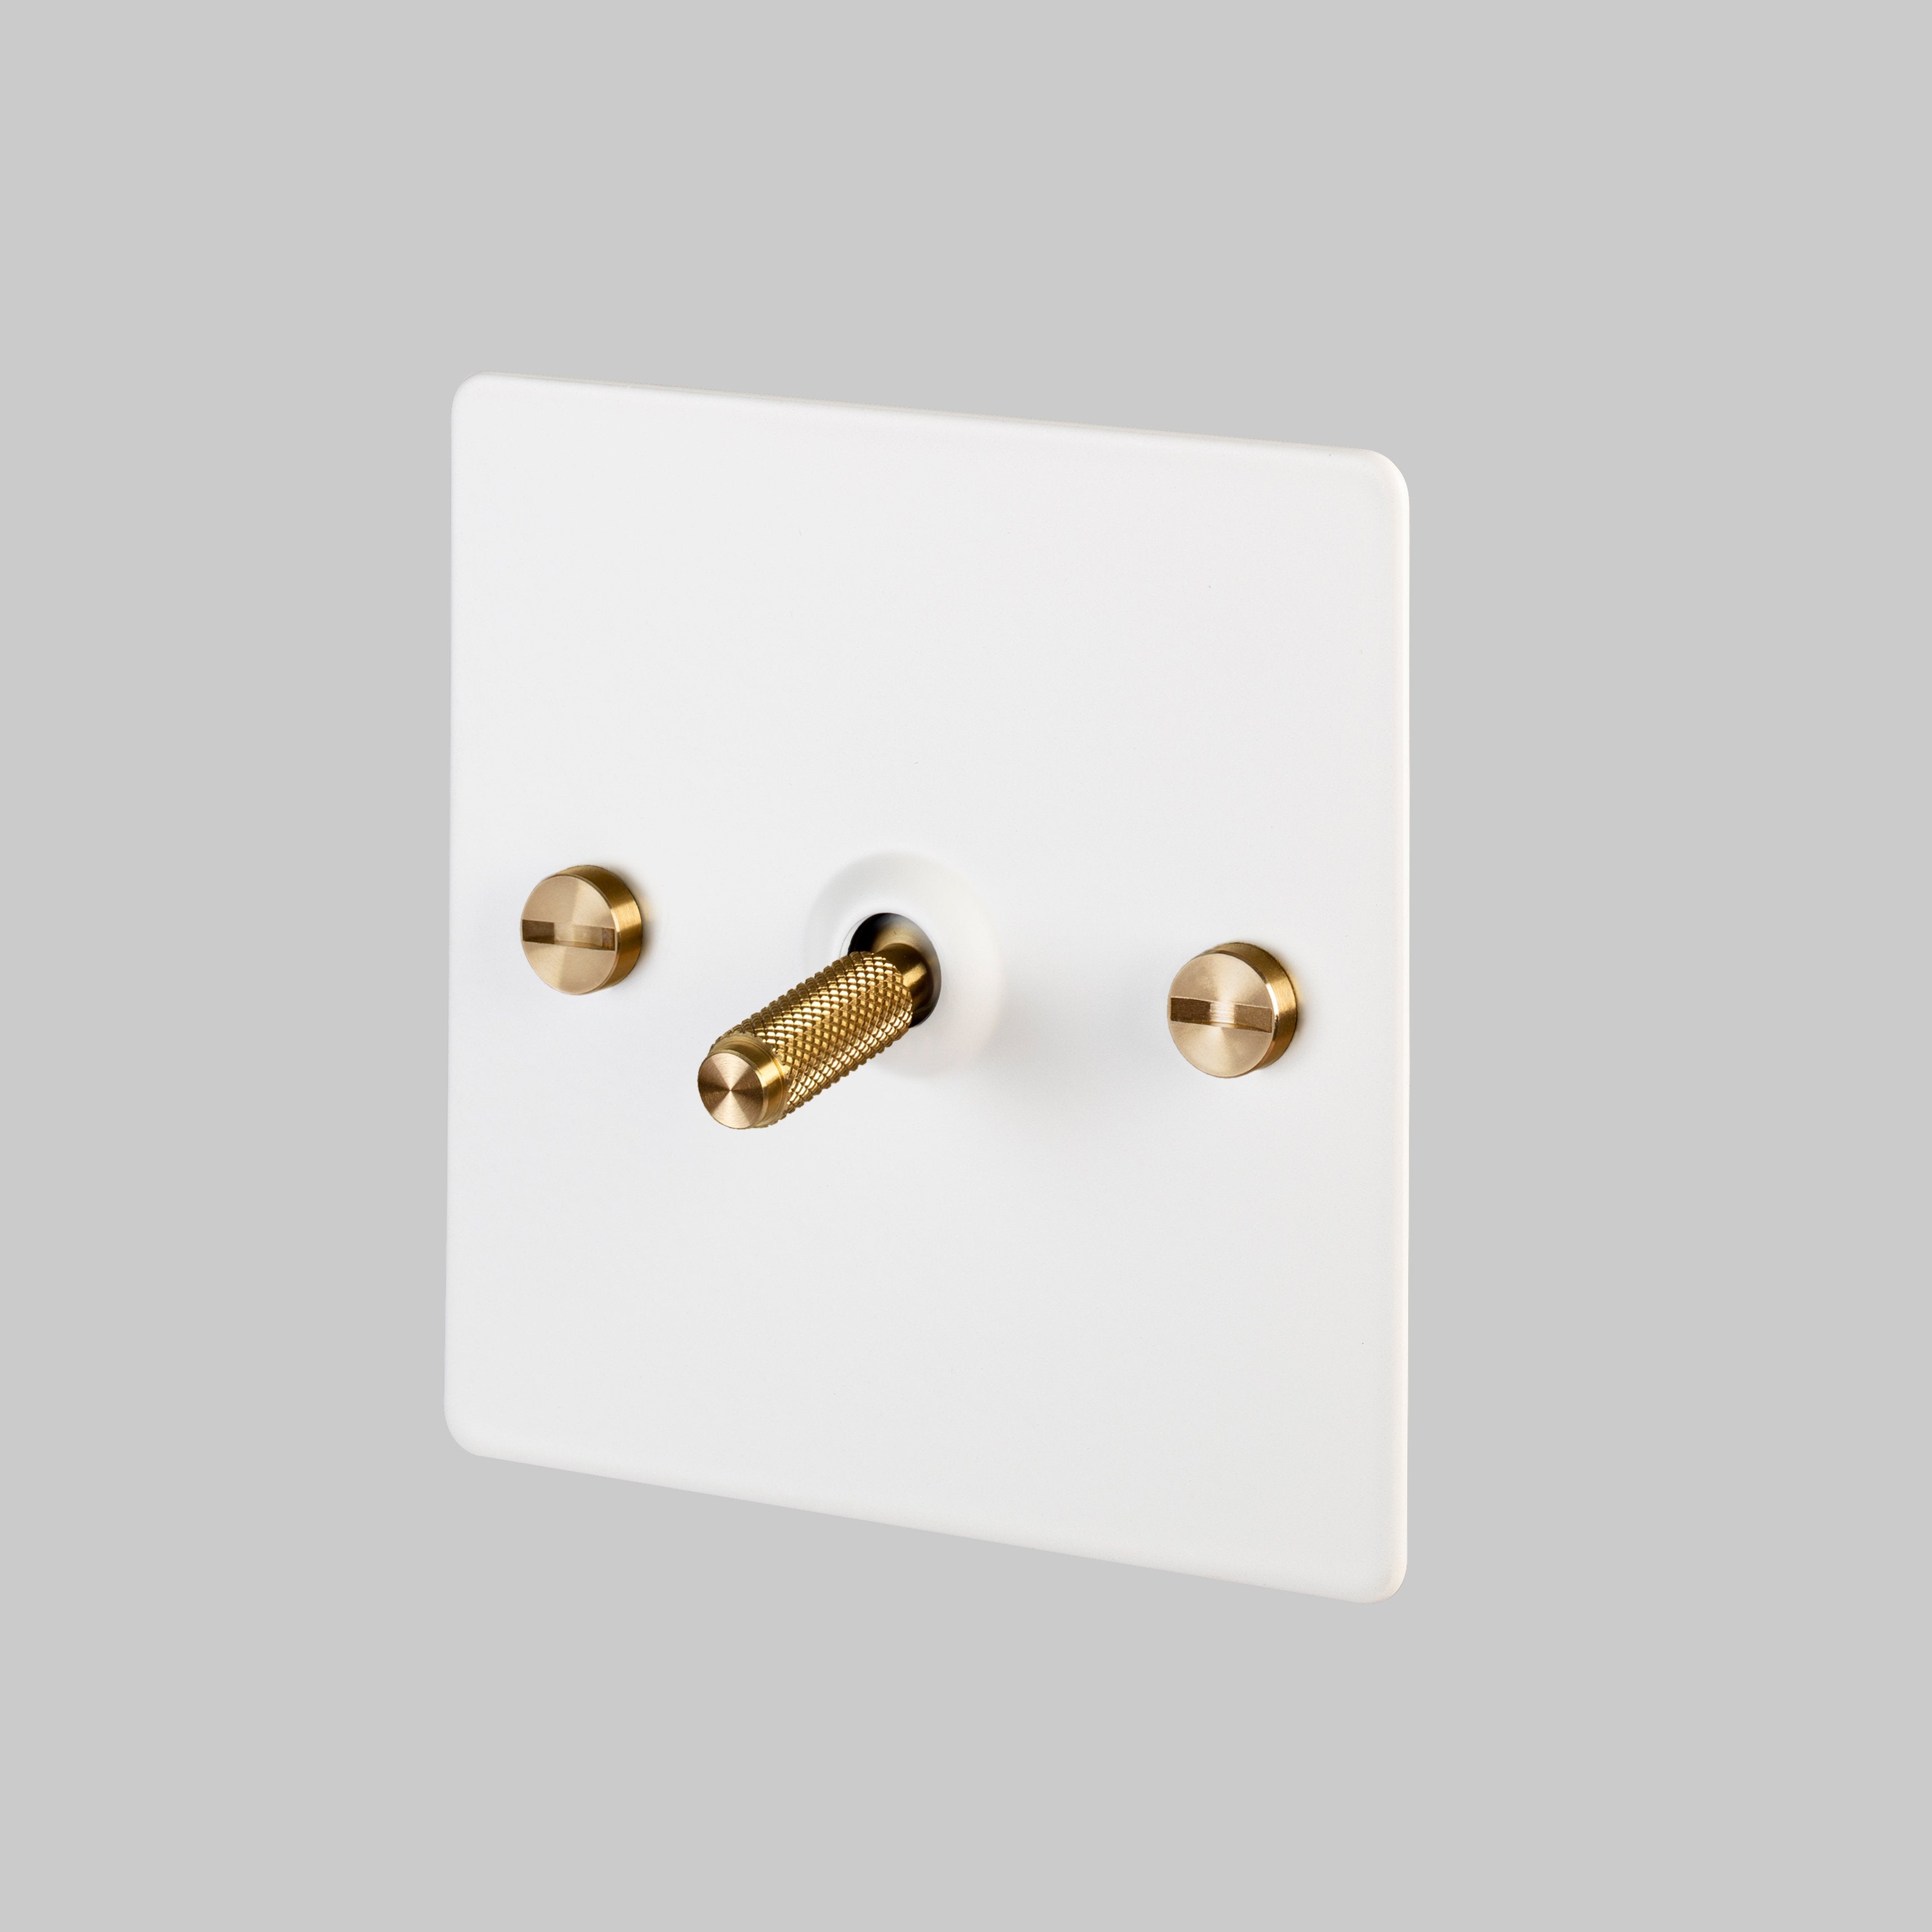 Buster and Punch 1G TOGGLE SWITCH / WHITE / BRASS - No.42 Interiors